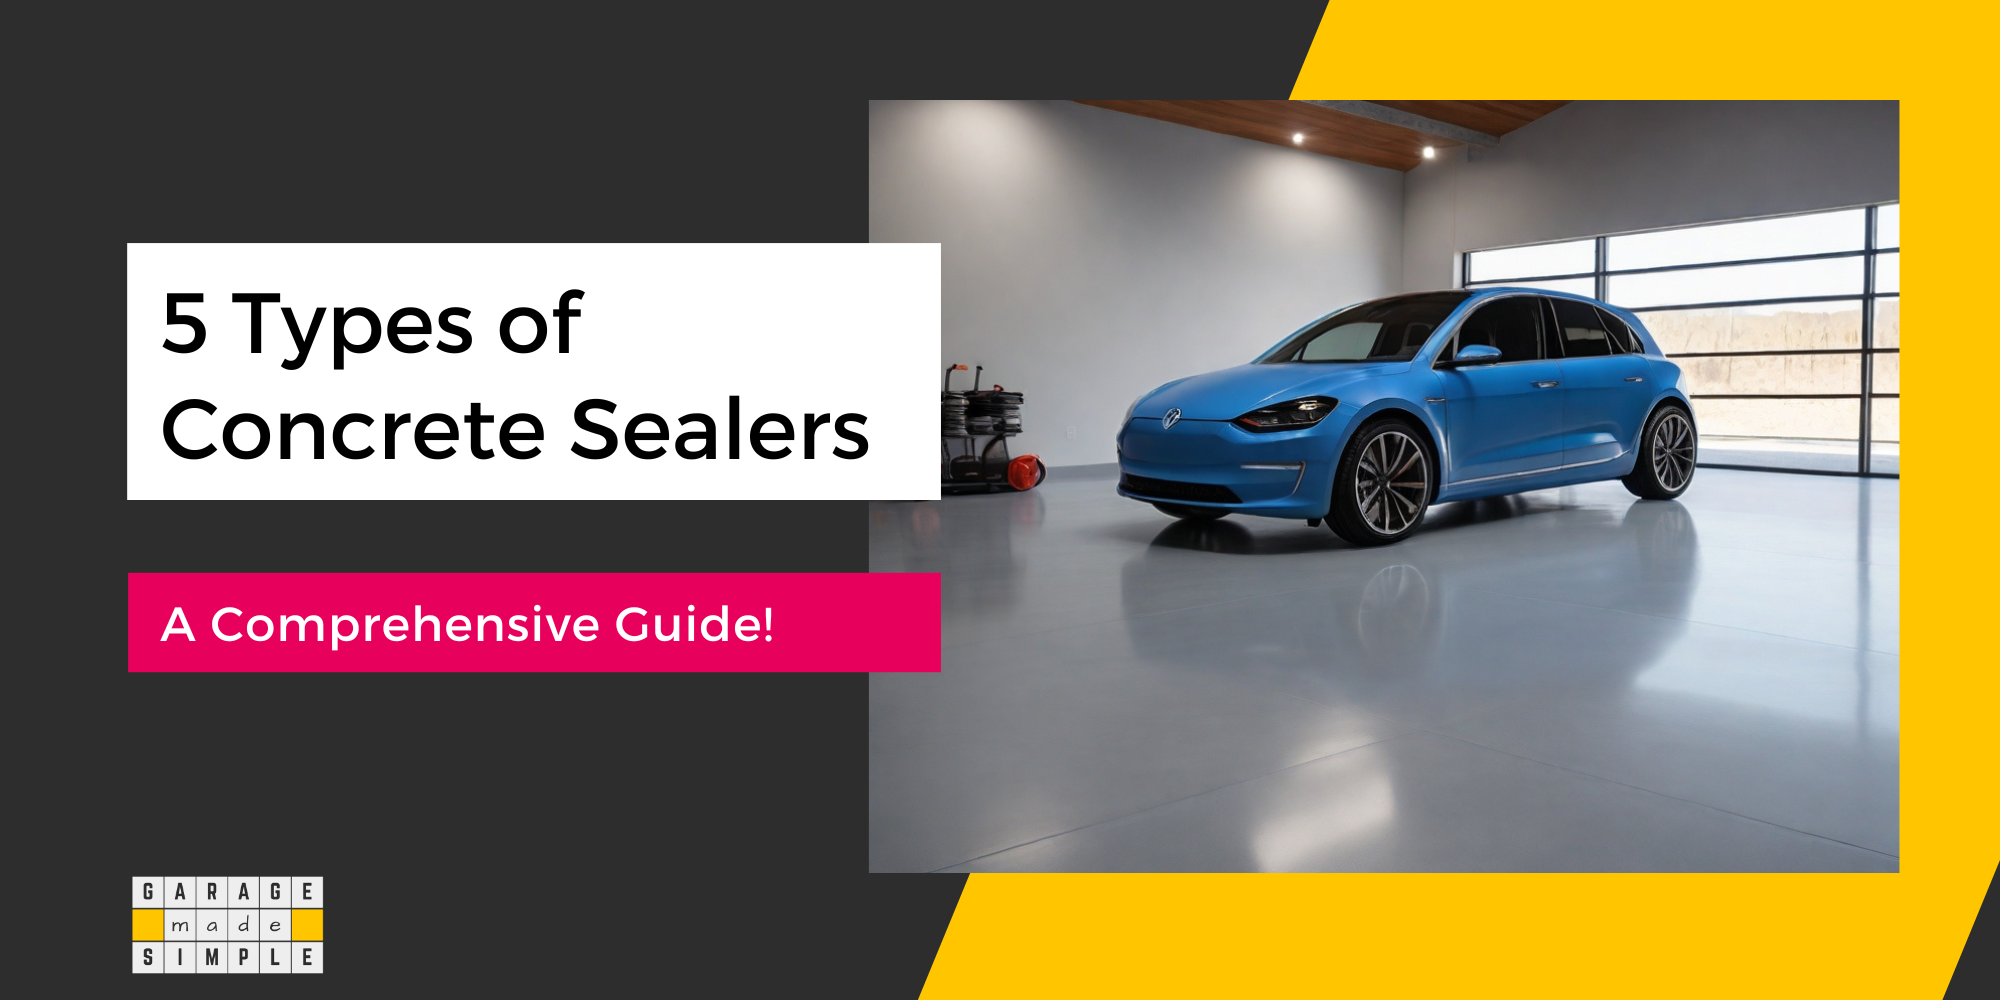 5 Types of Concrete Sealers for Garage Floors: A Comprehensive Guide!